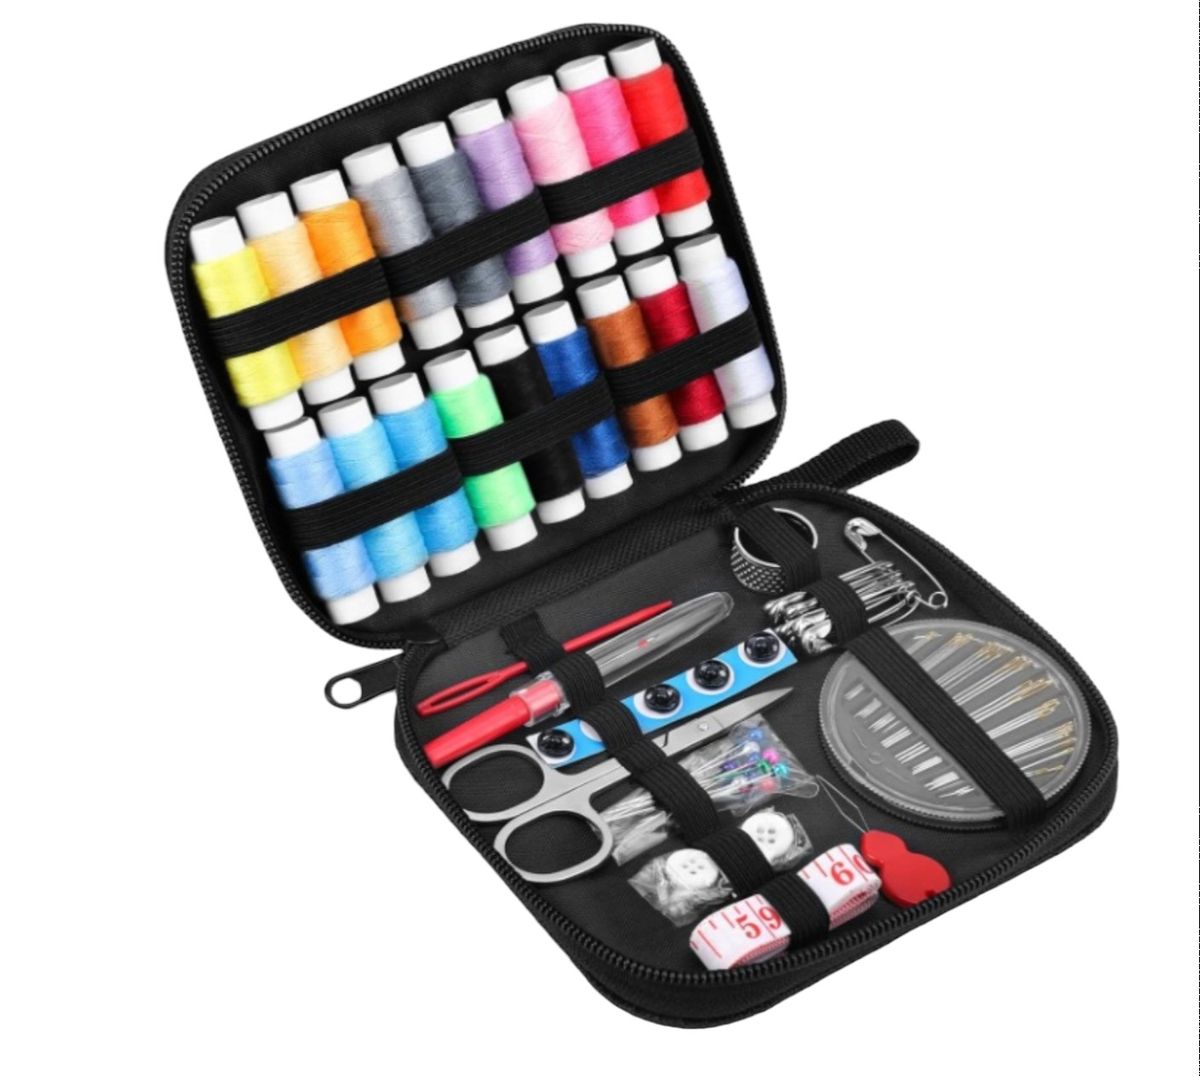 84 Piece Mini Portable Sewing Kit | Shop Today. Get it Tomorrow ...